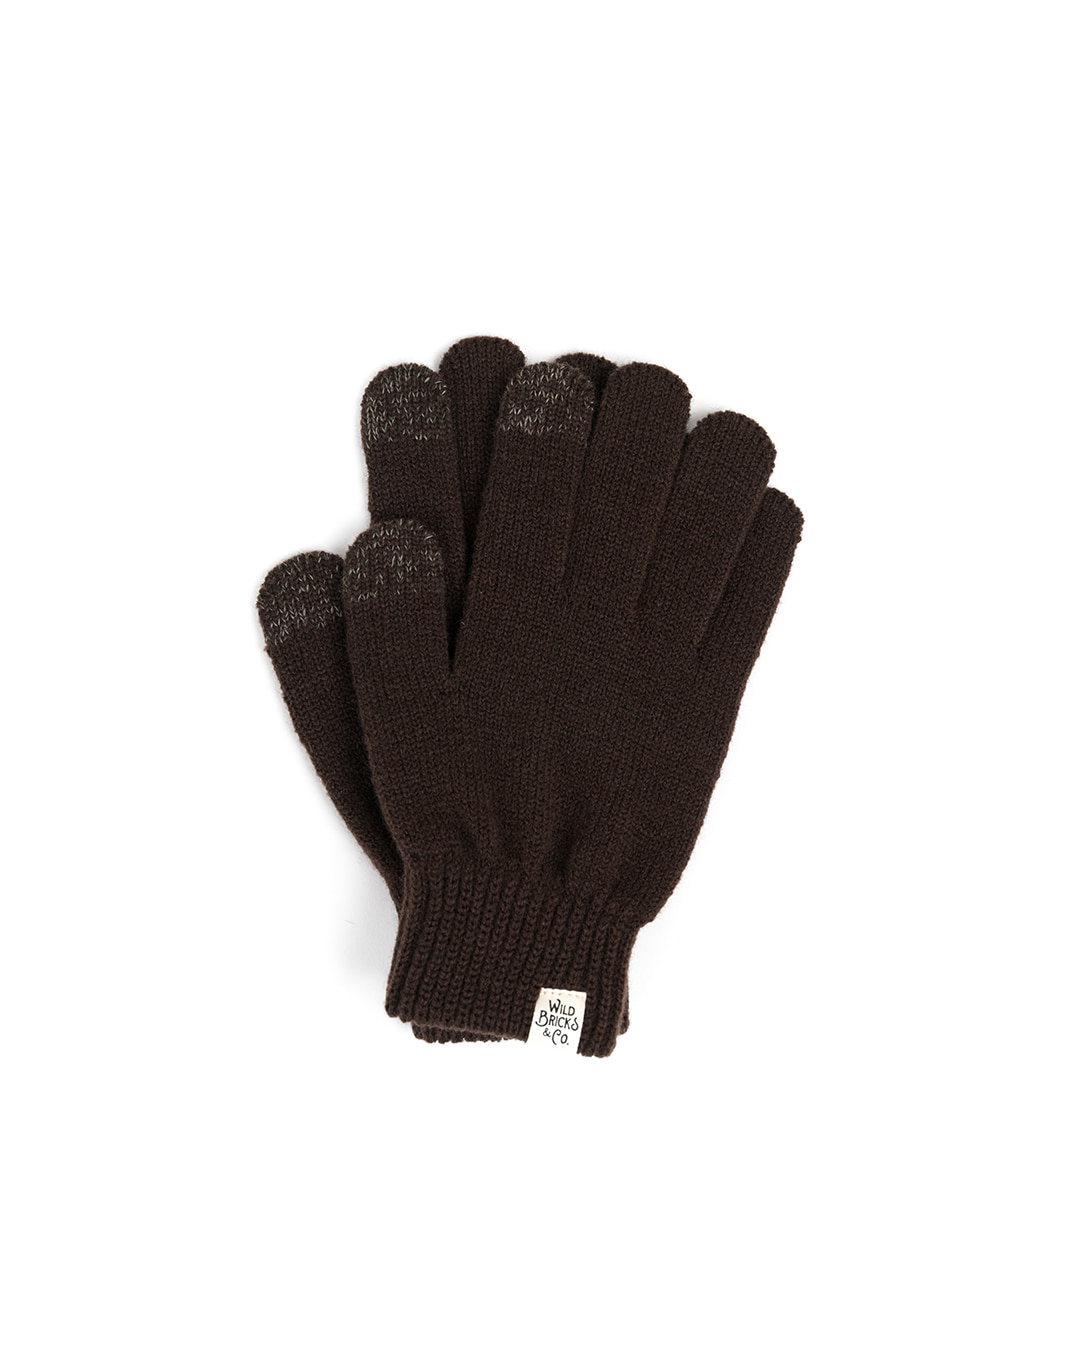 AW BASIC TOUCH GLOVES (brown)